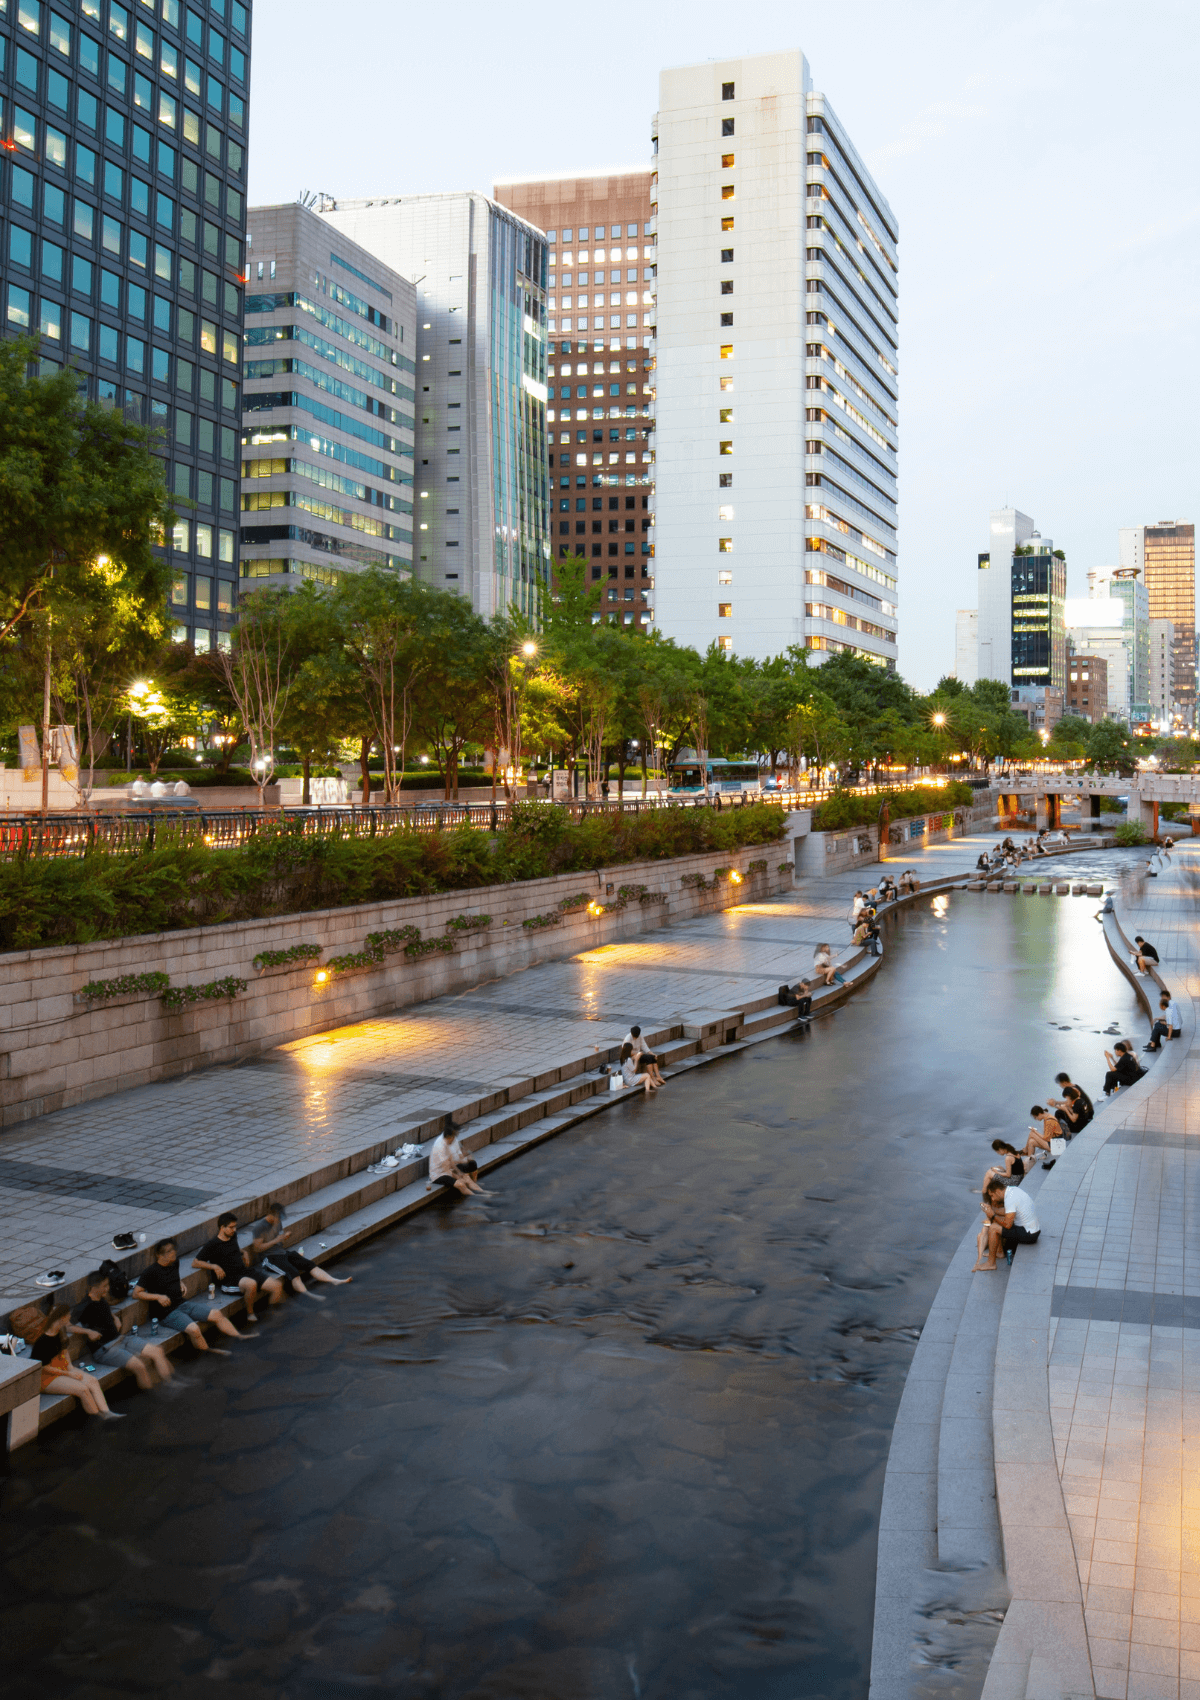 Cheonggyecheon Stream is included in a one day itinerary in Seoul